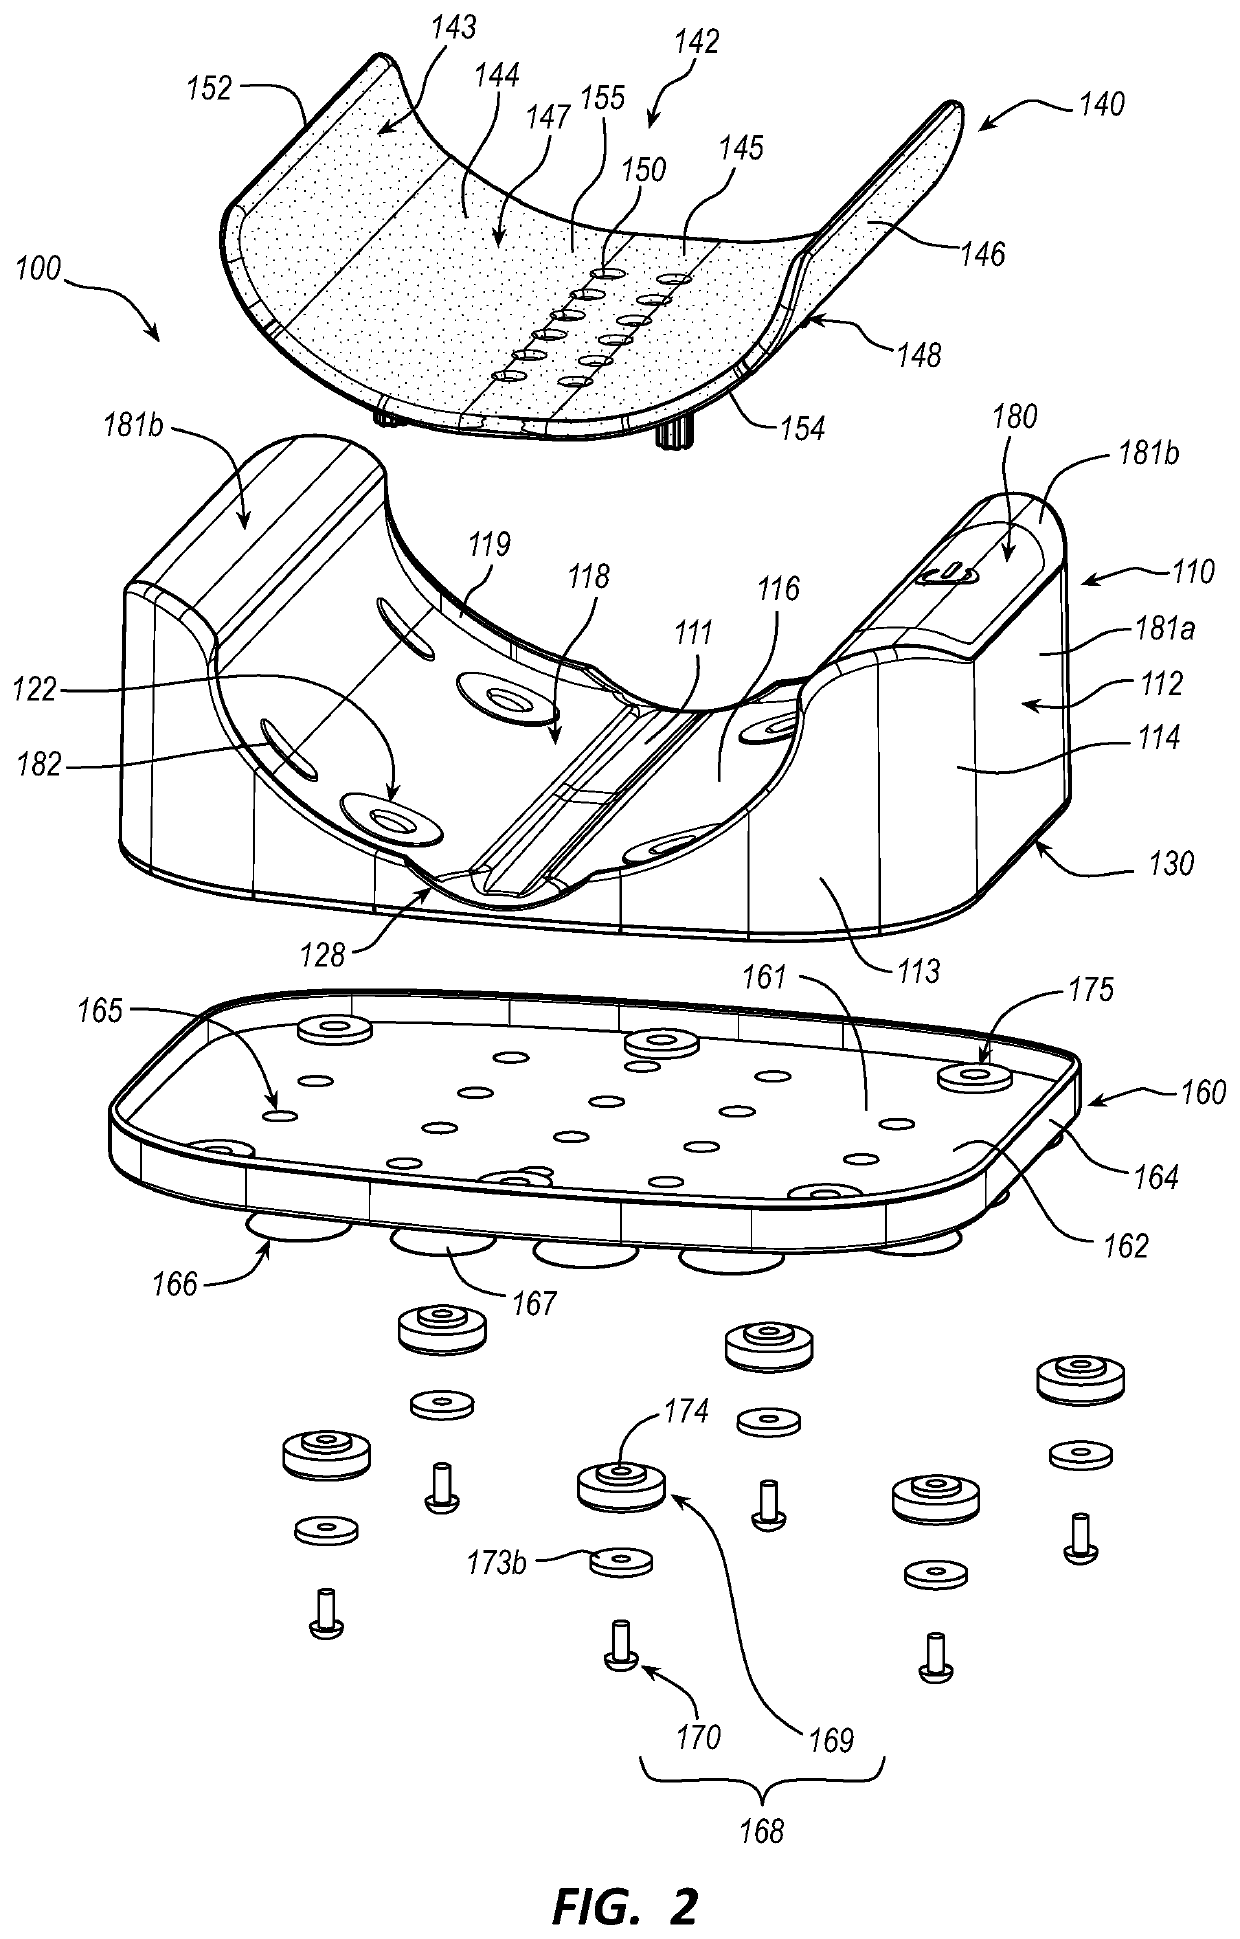 Foot care products and methods of use